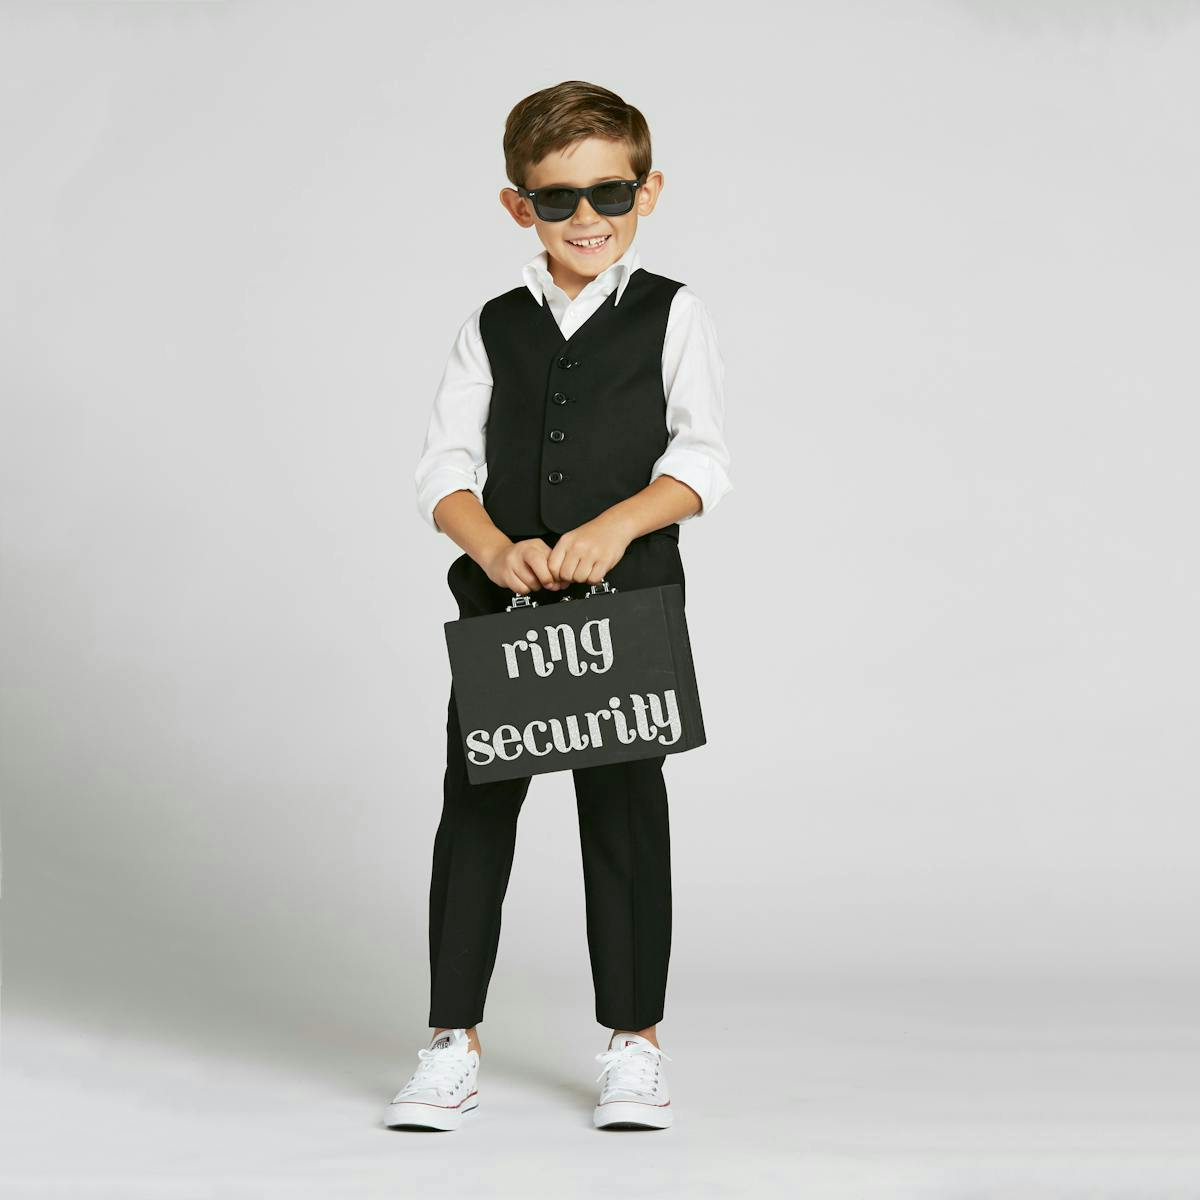 Cheep suits for ring bearers. The Groomsman Suit sells the best kids suits. 